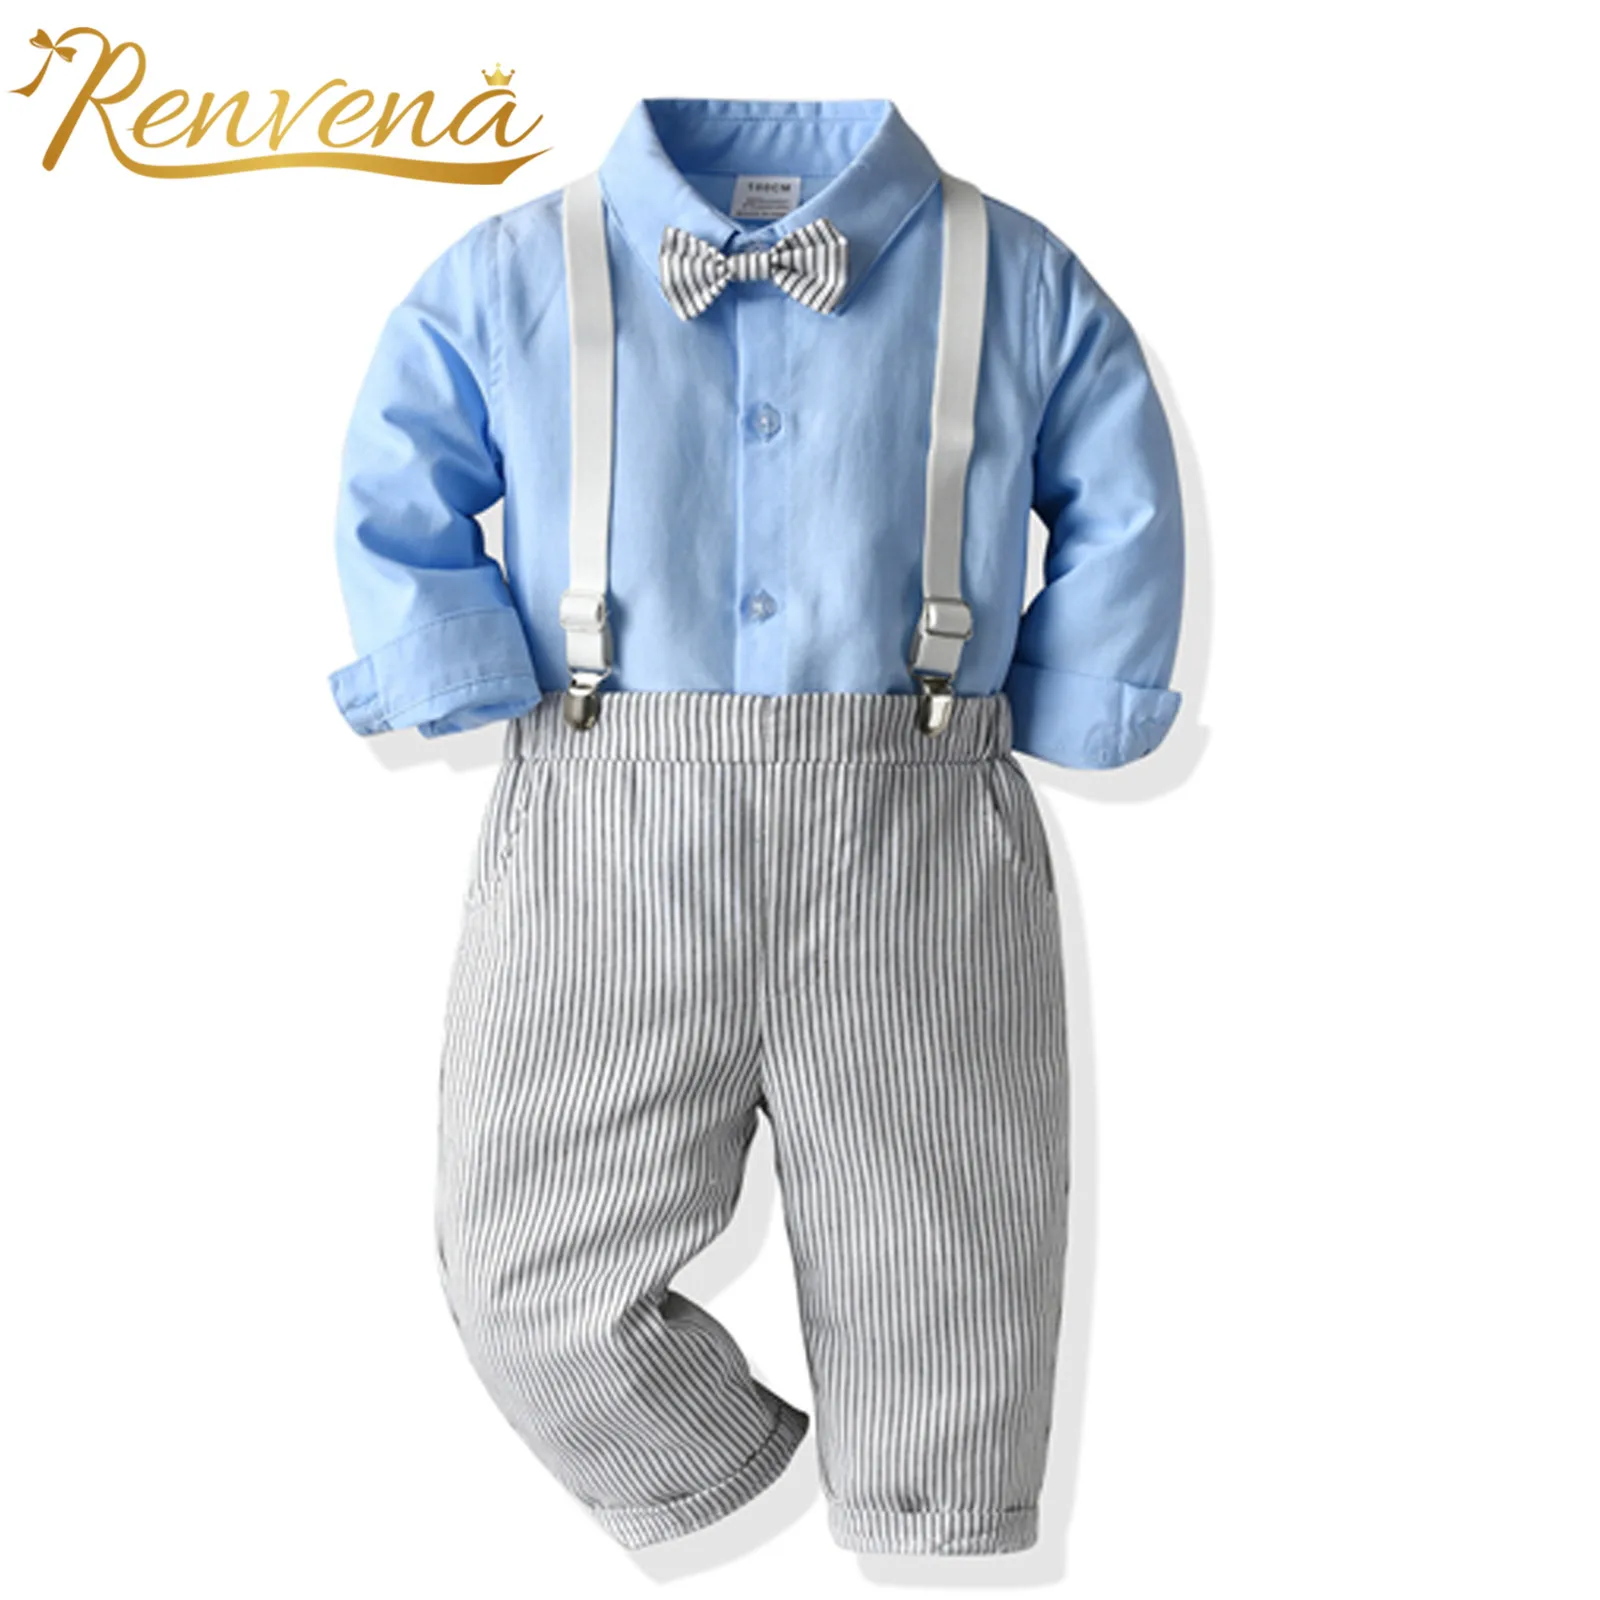 

2Pcs Baby Boys Clothes Sets Gentleman Boy's Suits for Wedding Long Sleeve Shirt with Bowtie + Pant Kids Outfits Childrens' Set